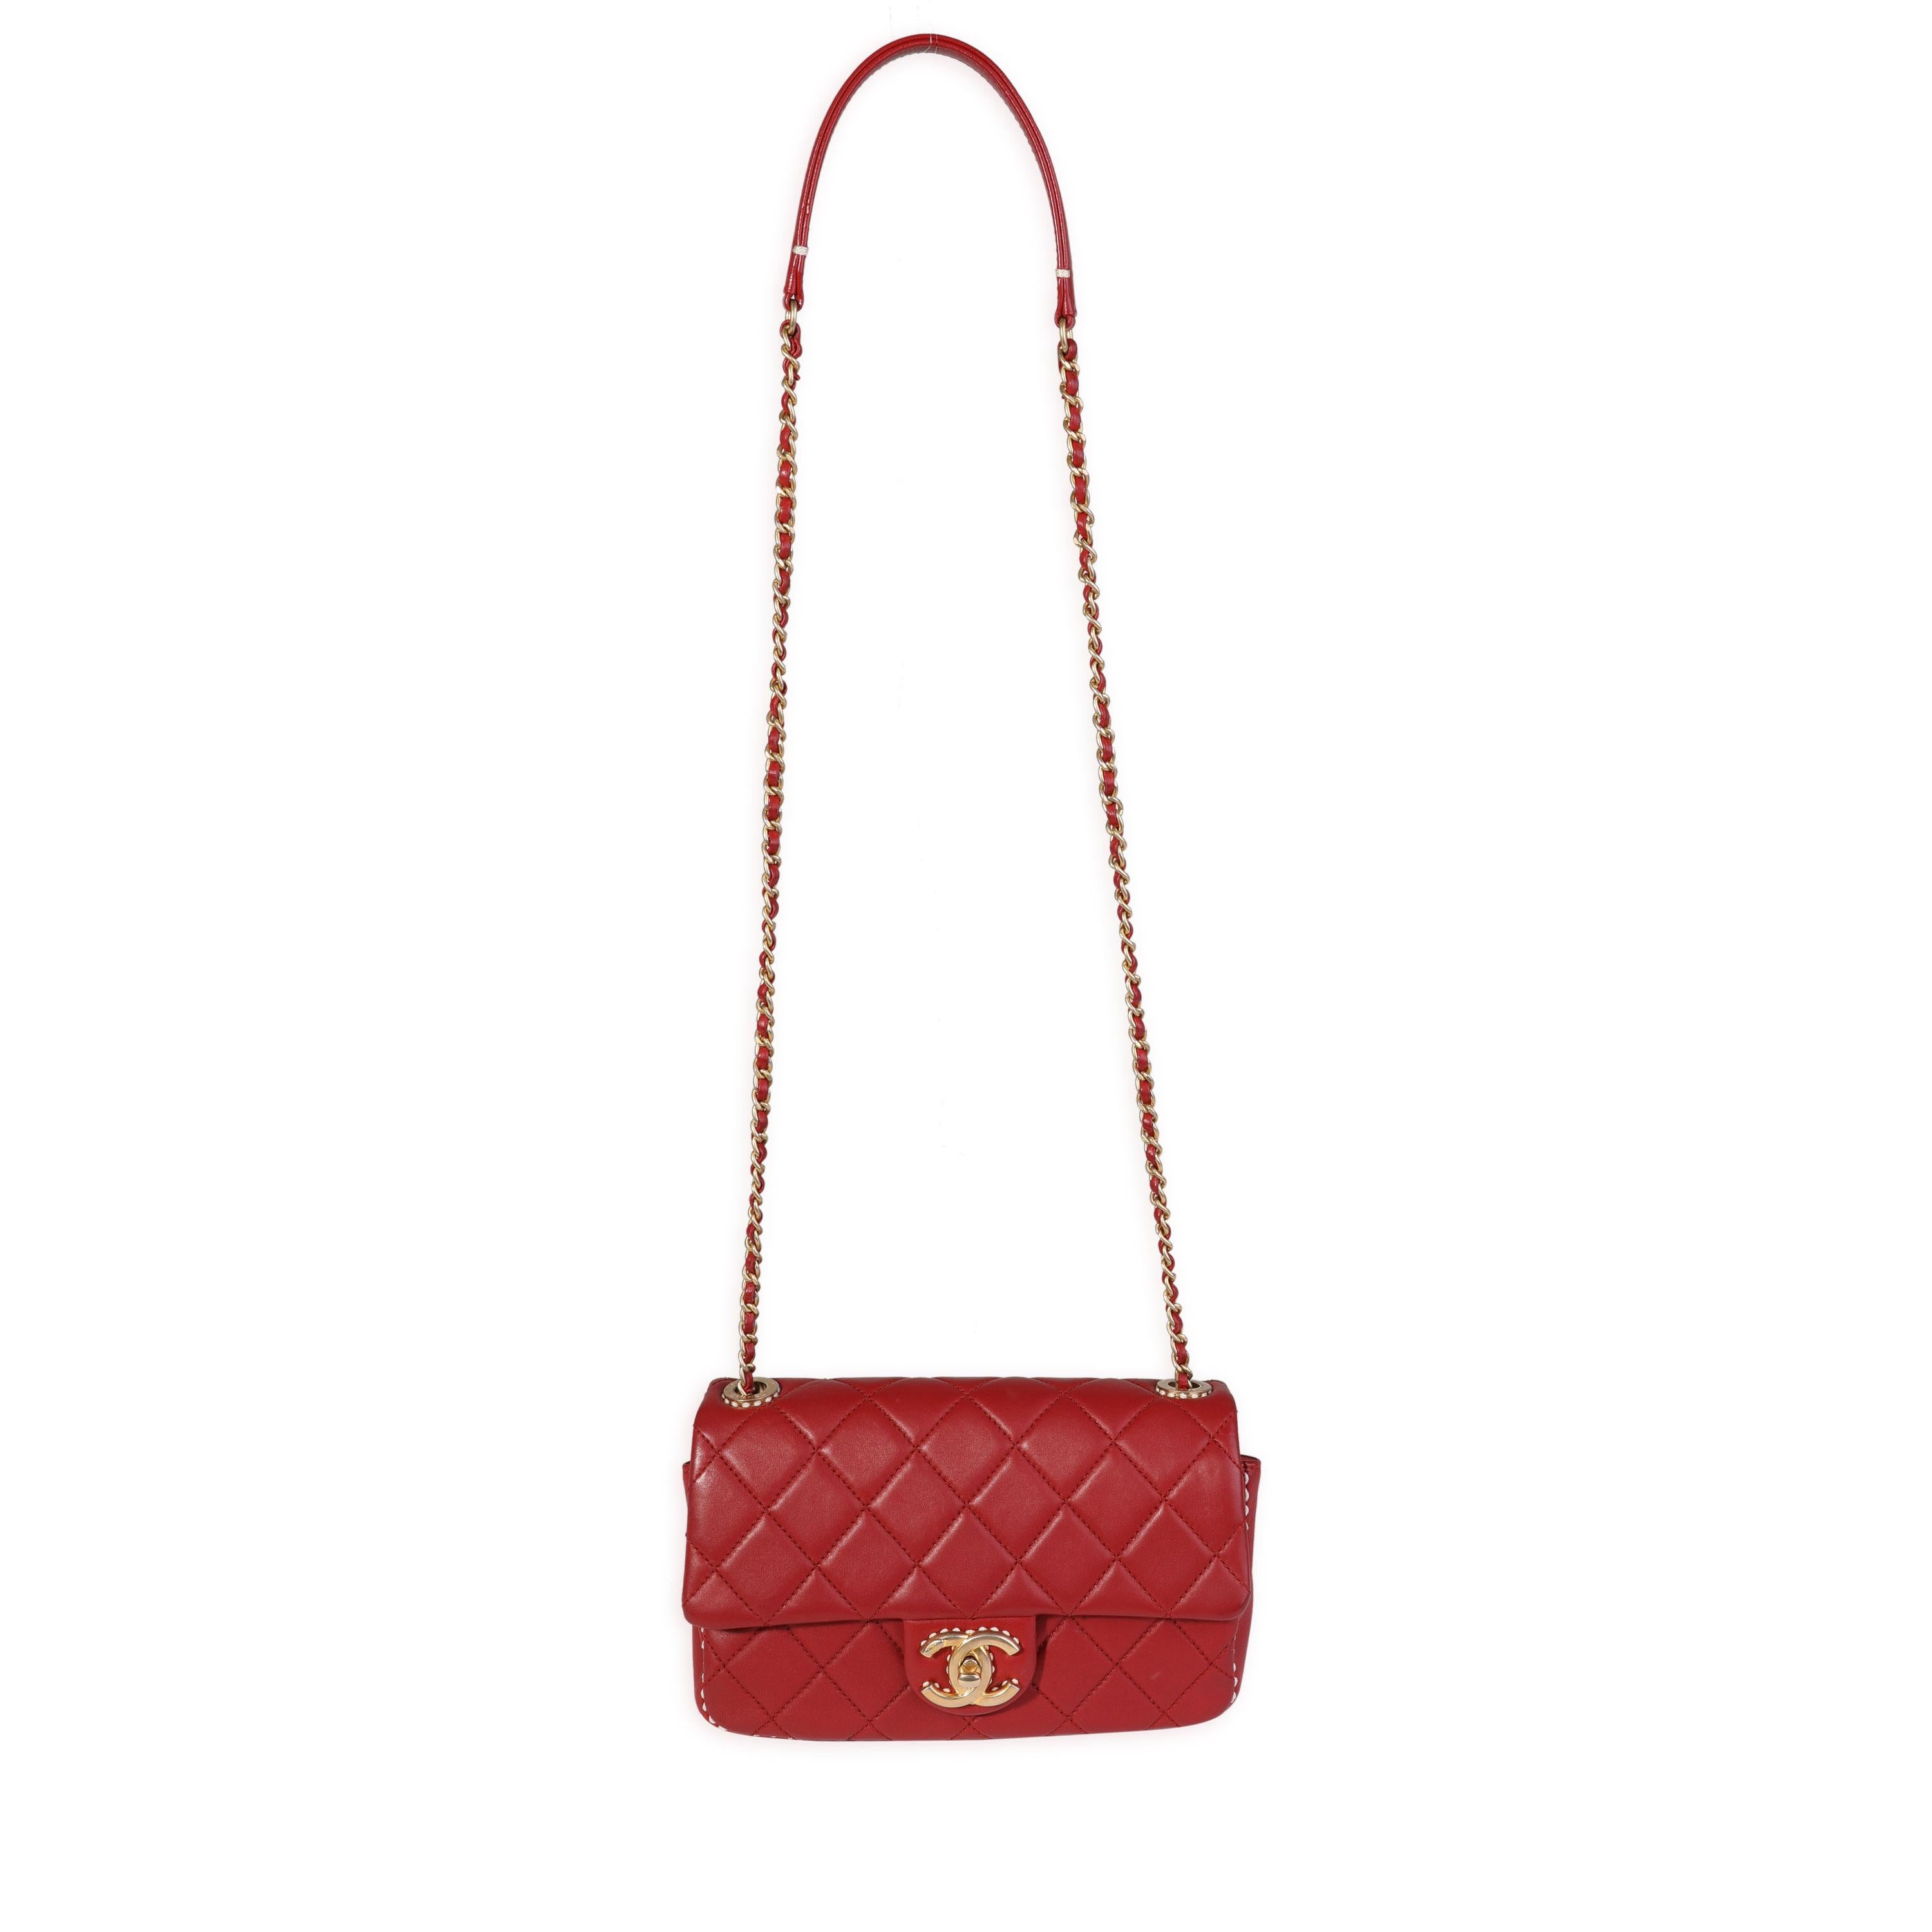 Listing Title: Chanel Red Quilted Lambskin Small Stitched Single Flap Bag
SKU: 120693
Condition: Pre-owned (3000)
Handbag Condition: Very Good
Condition Comments: Very Good Condition. Scuffing to leather. Shape loss due to wear.
Brand: Chanel
Model: